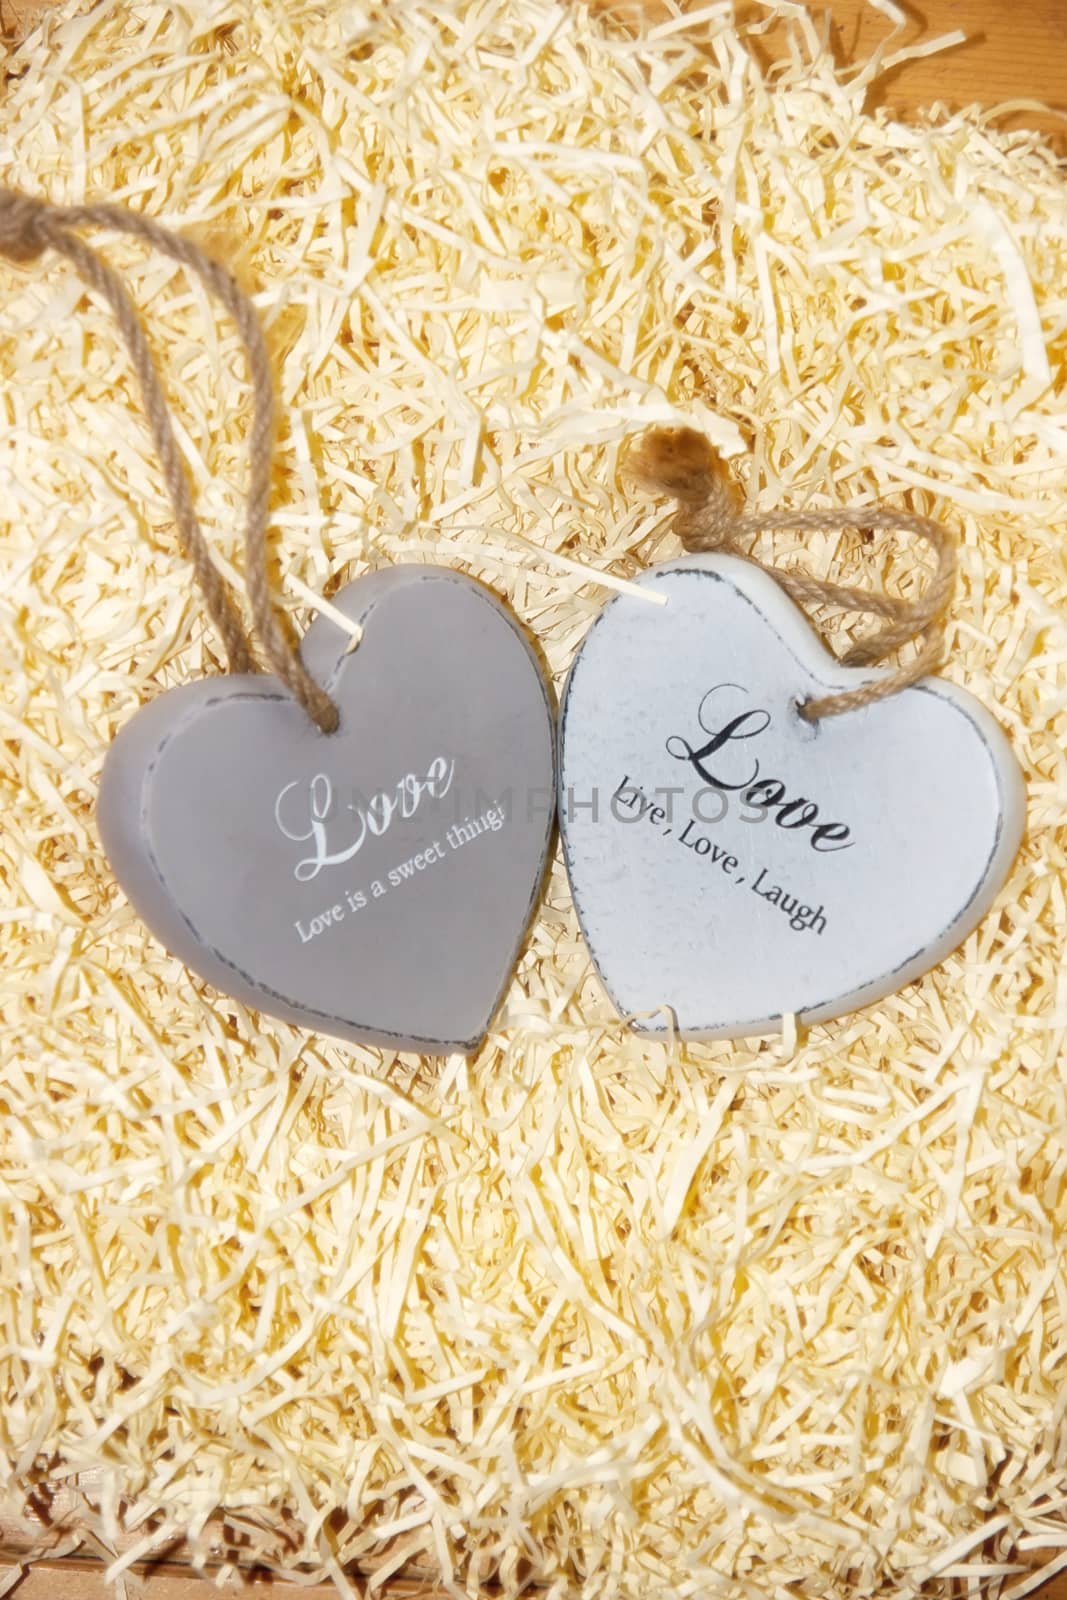 two grey wooden love hearts in a love nest made of straw with loving inscriptions